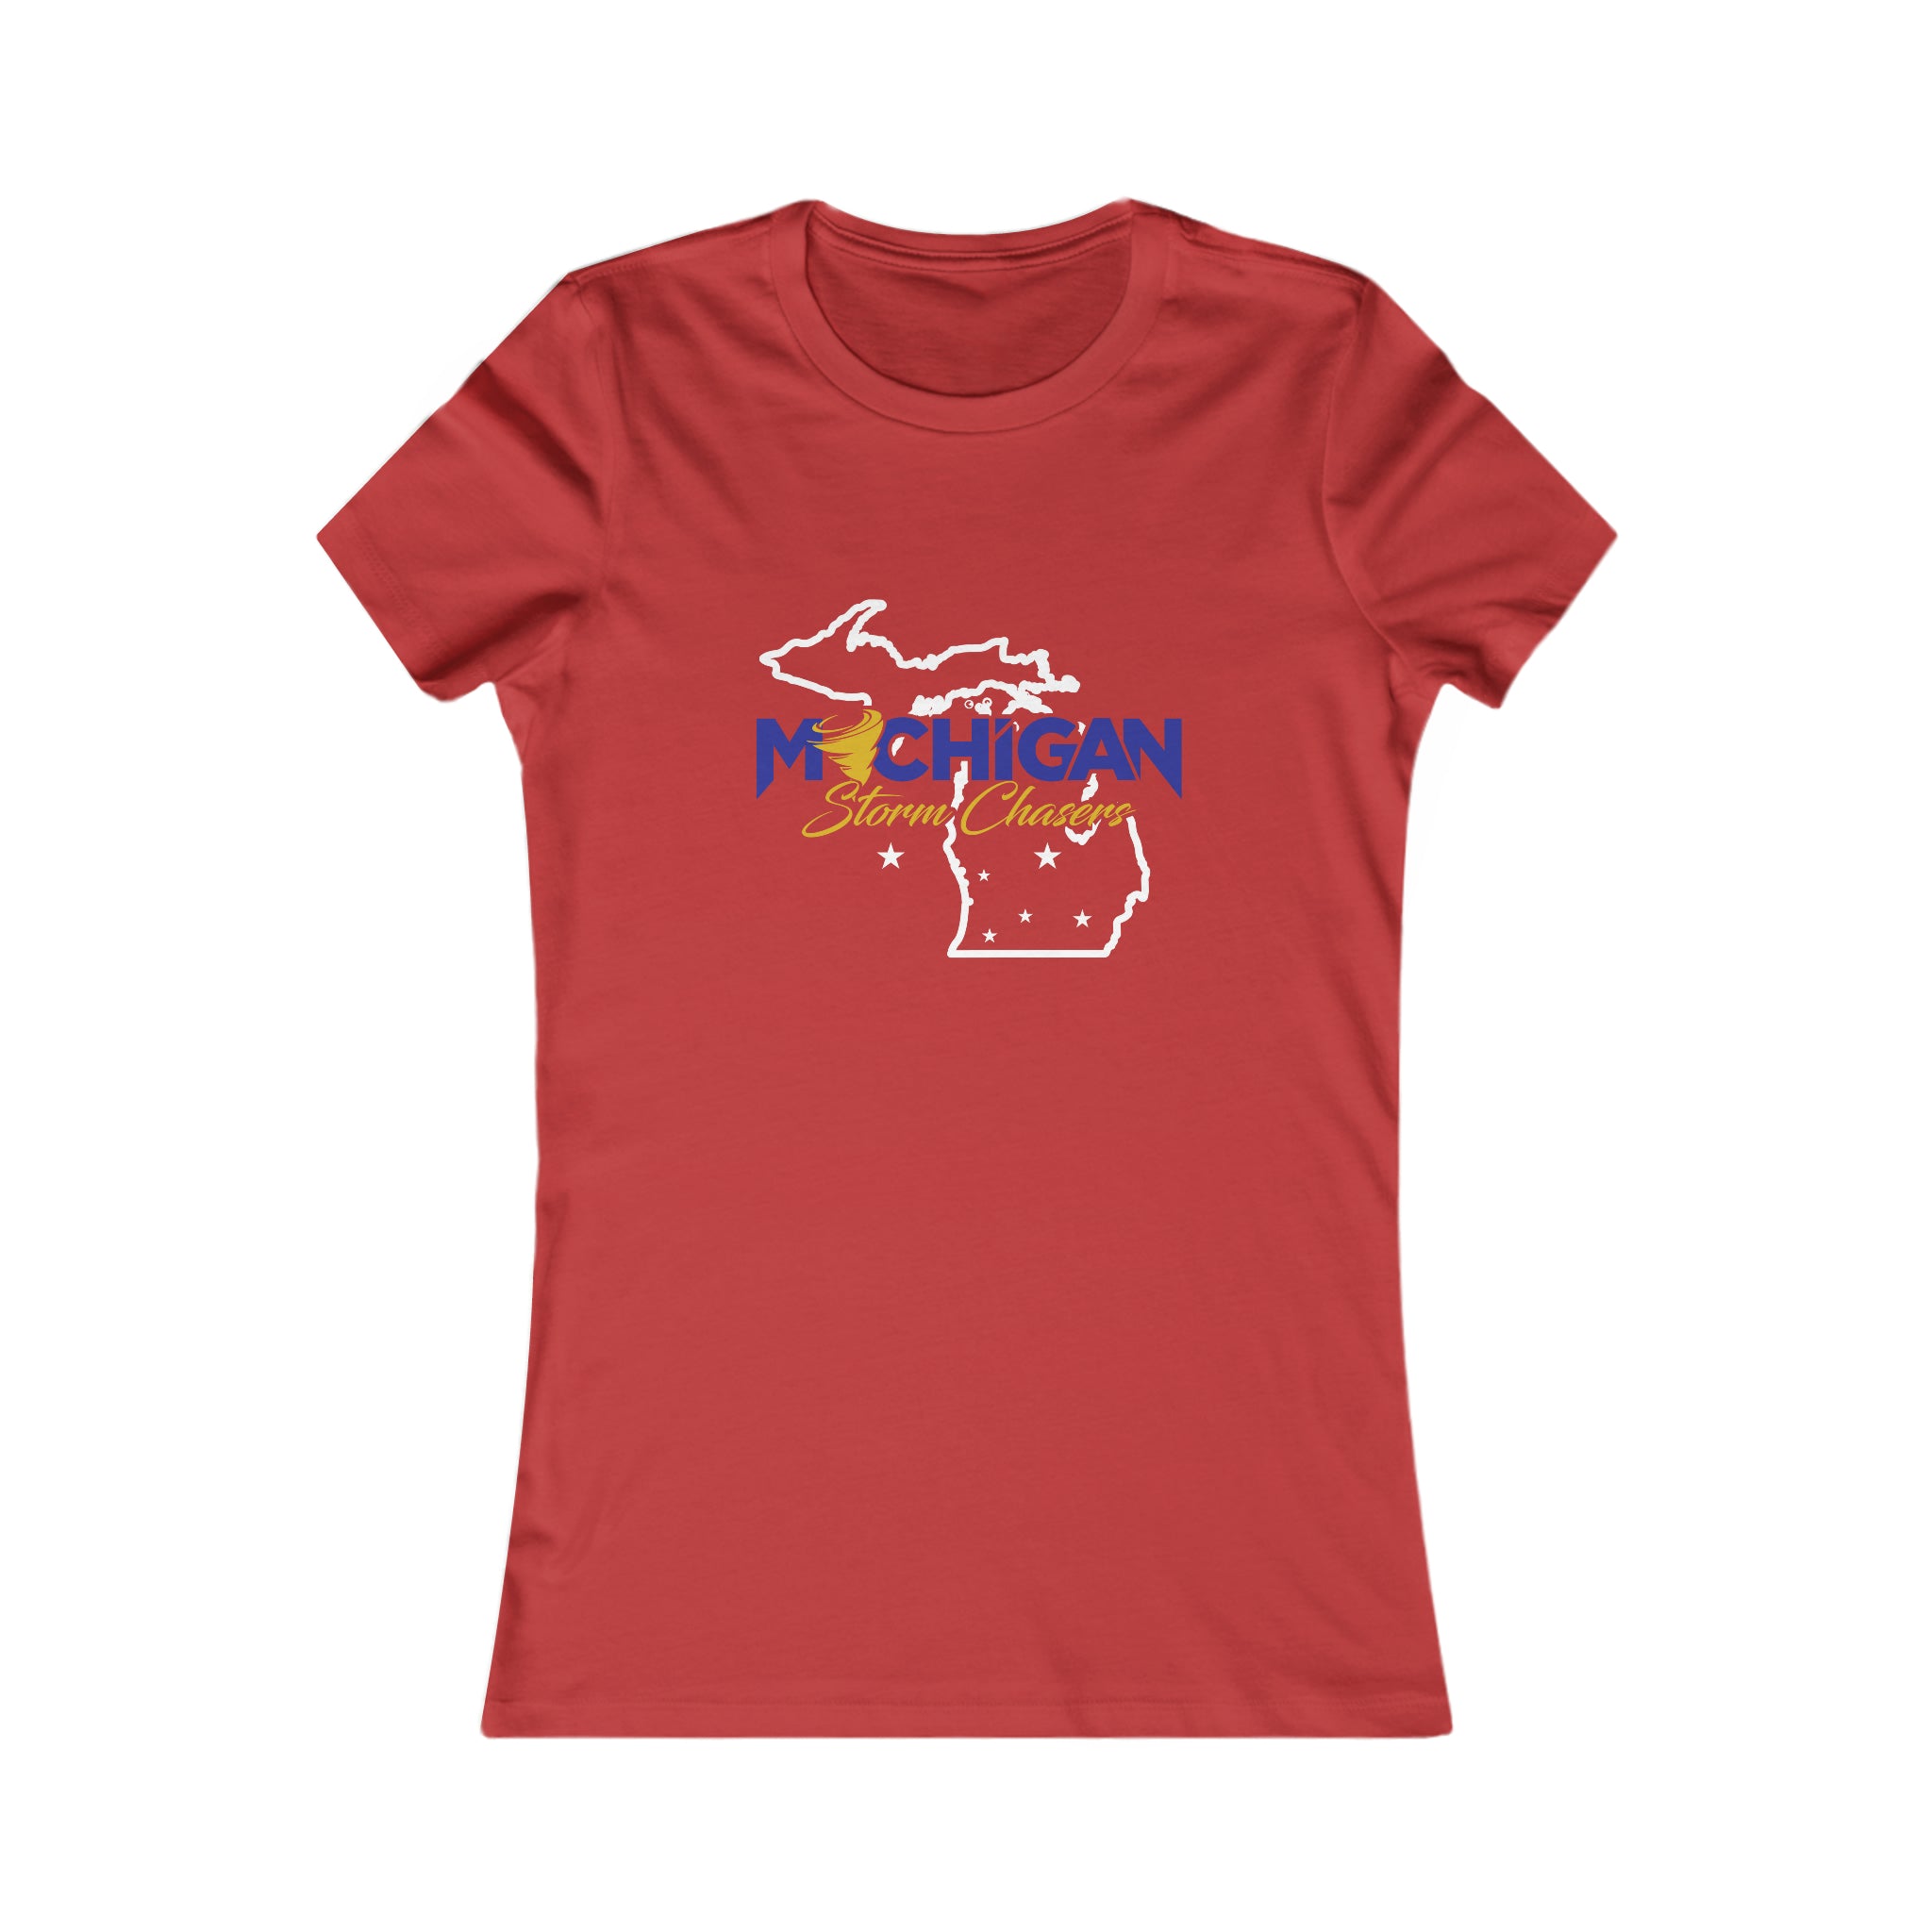 Michigan Storm Chasers Women's Tee 